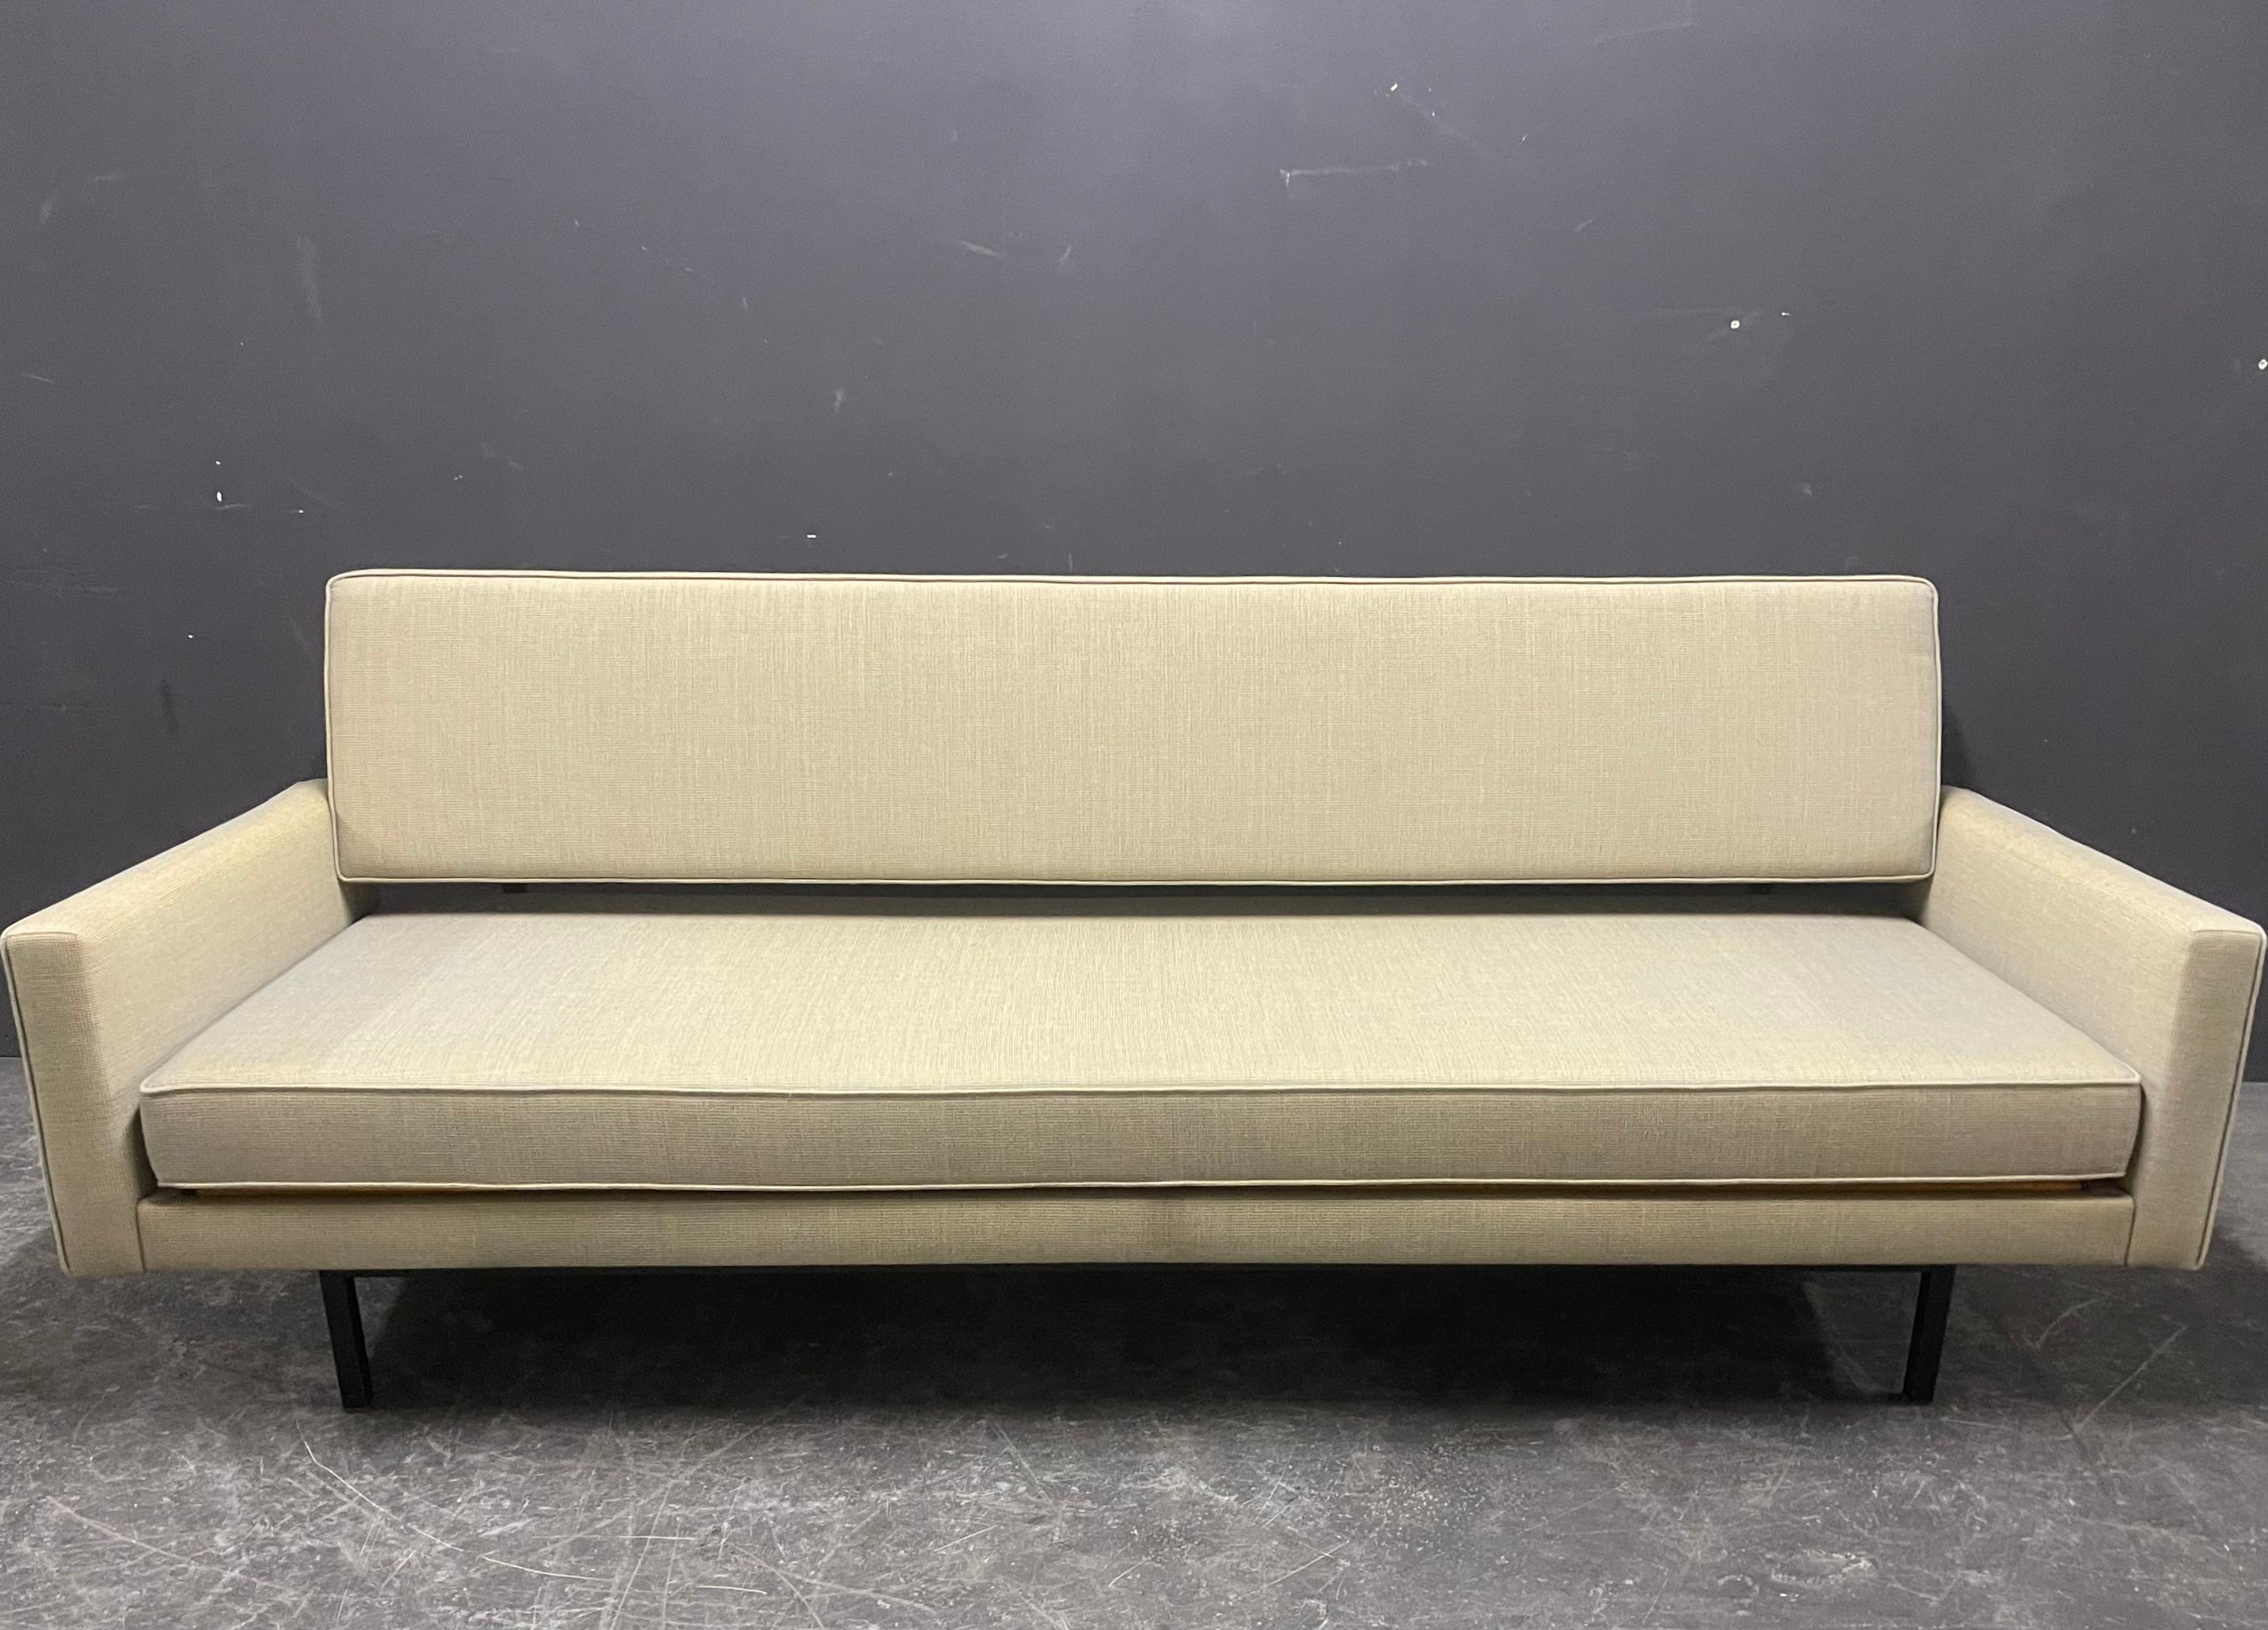 Rare No. 704 Richard Schultz Knoll International Daybed / Sofa For Sale 5